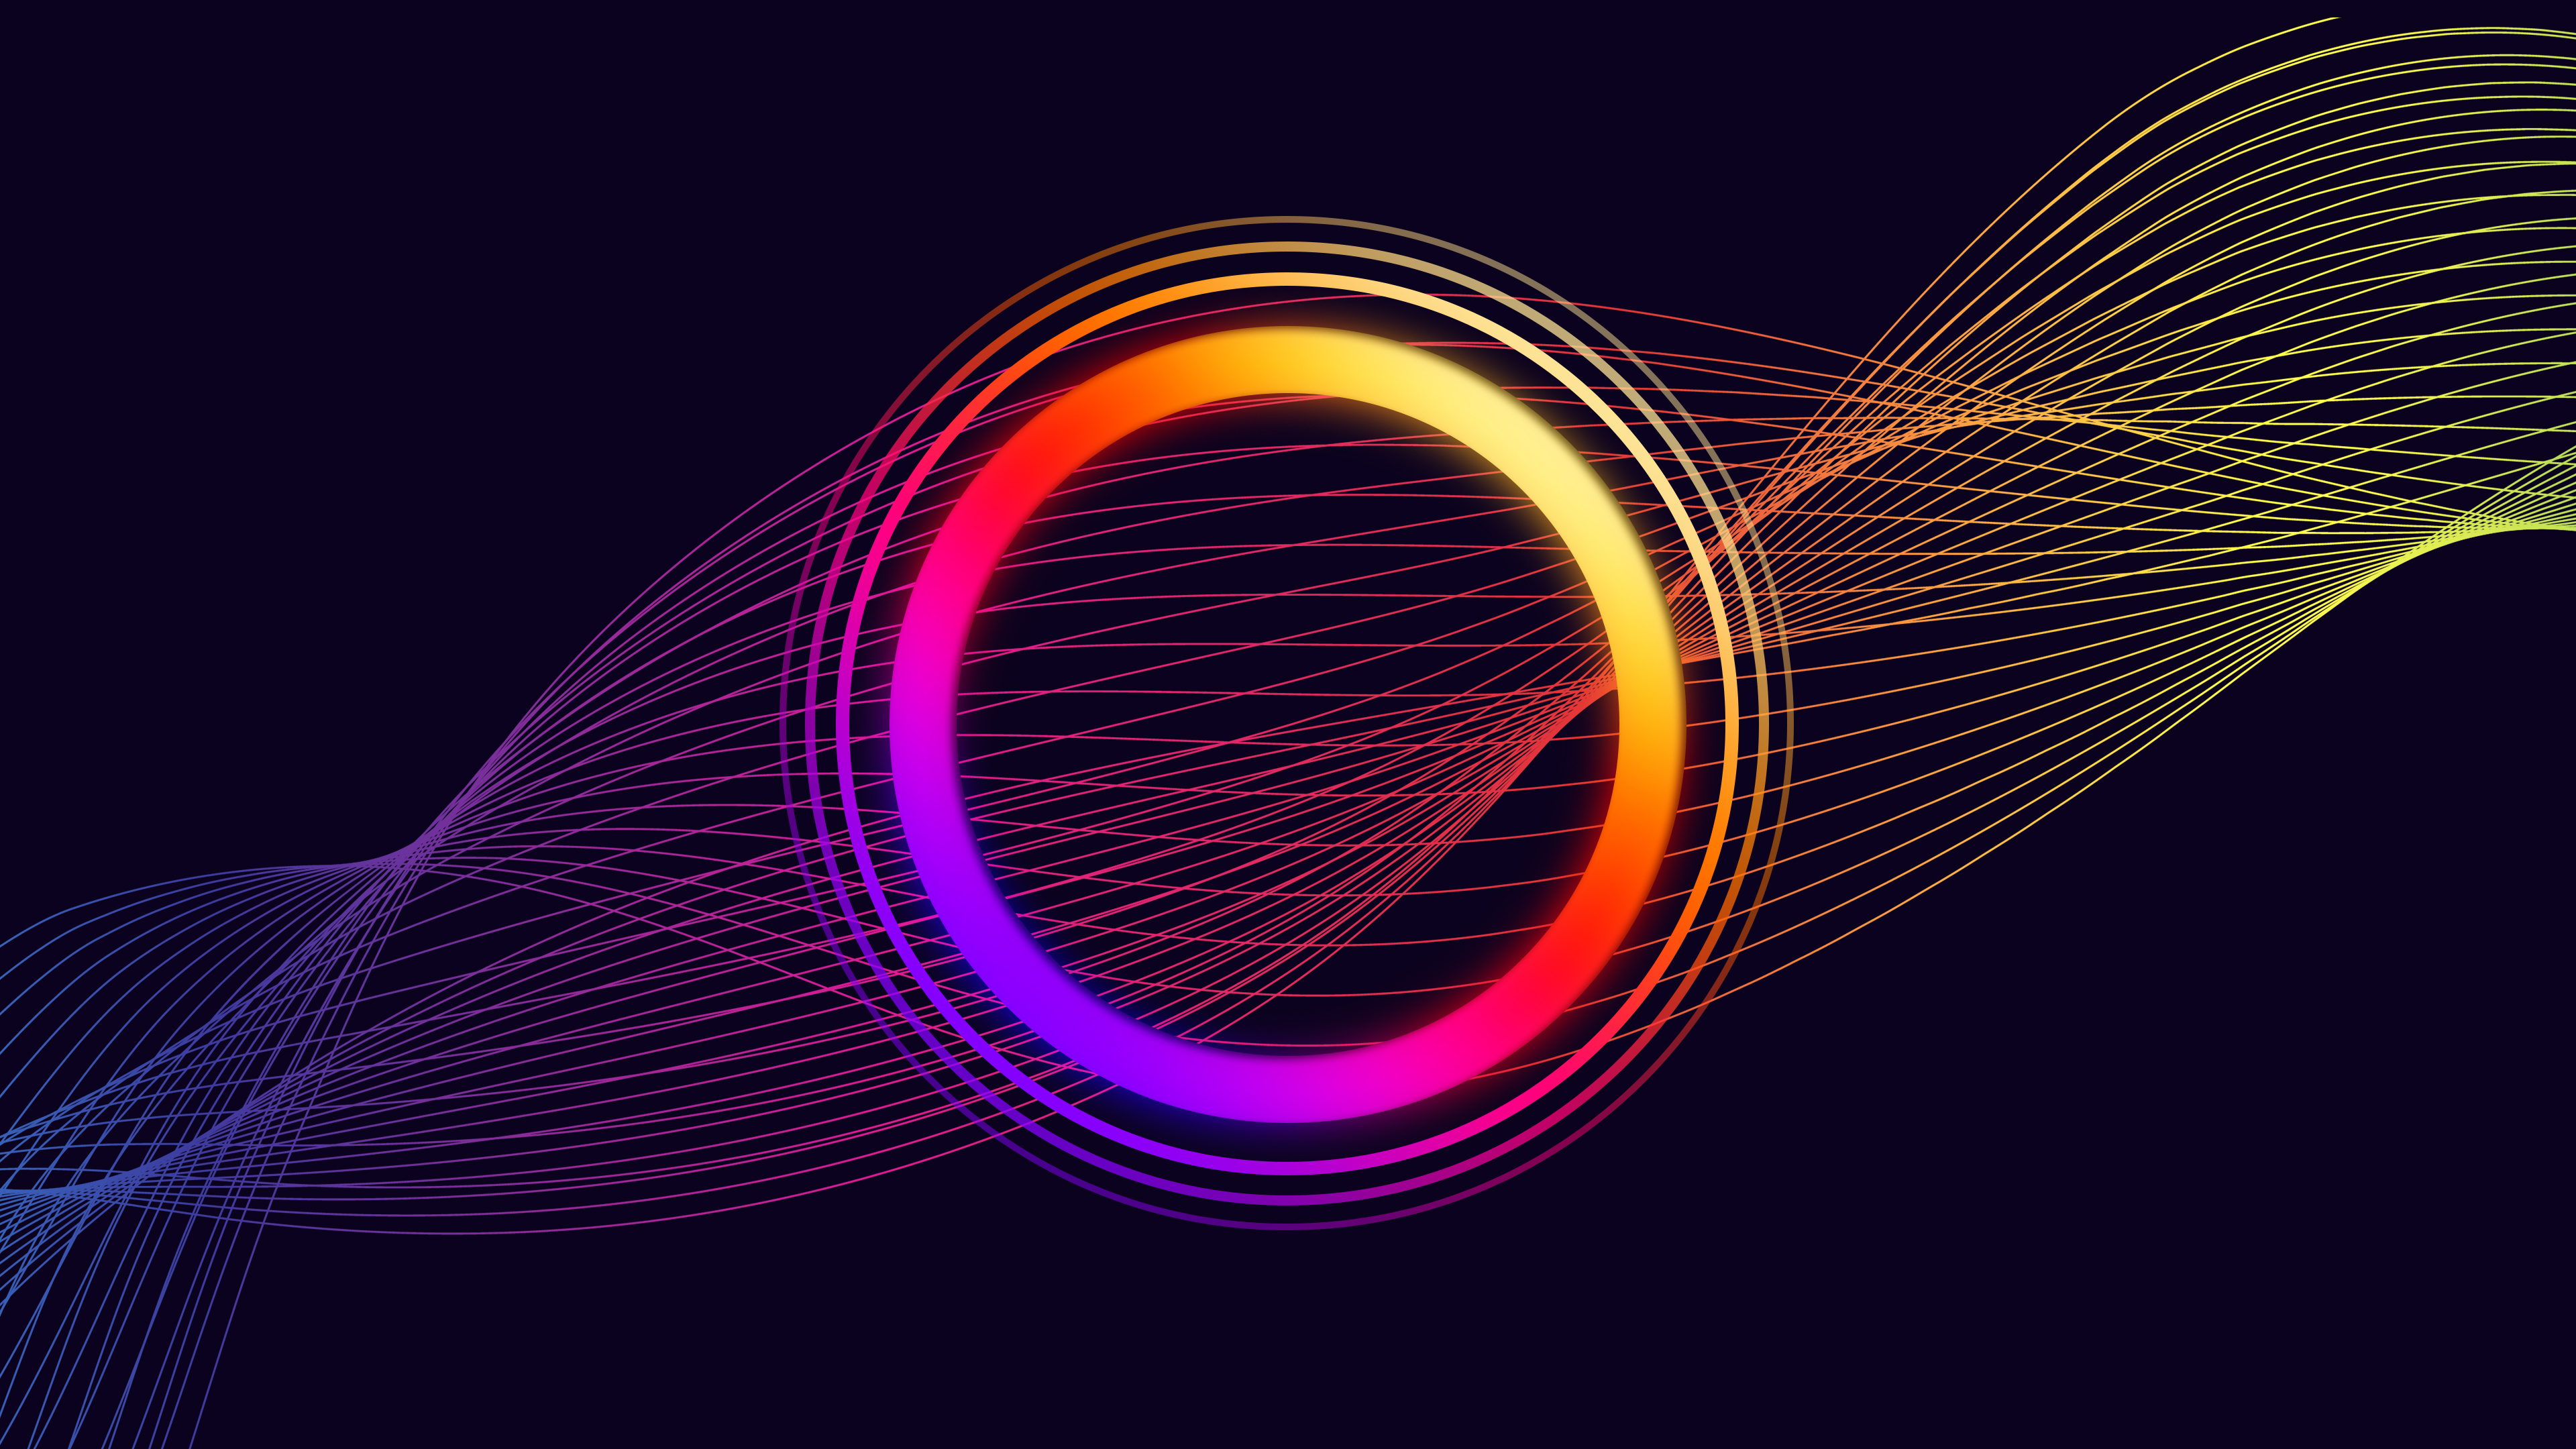 Abtract design with circles and wavy lines. by ishan730